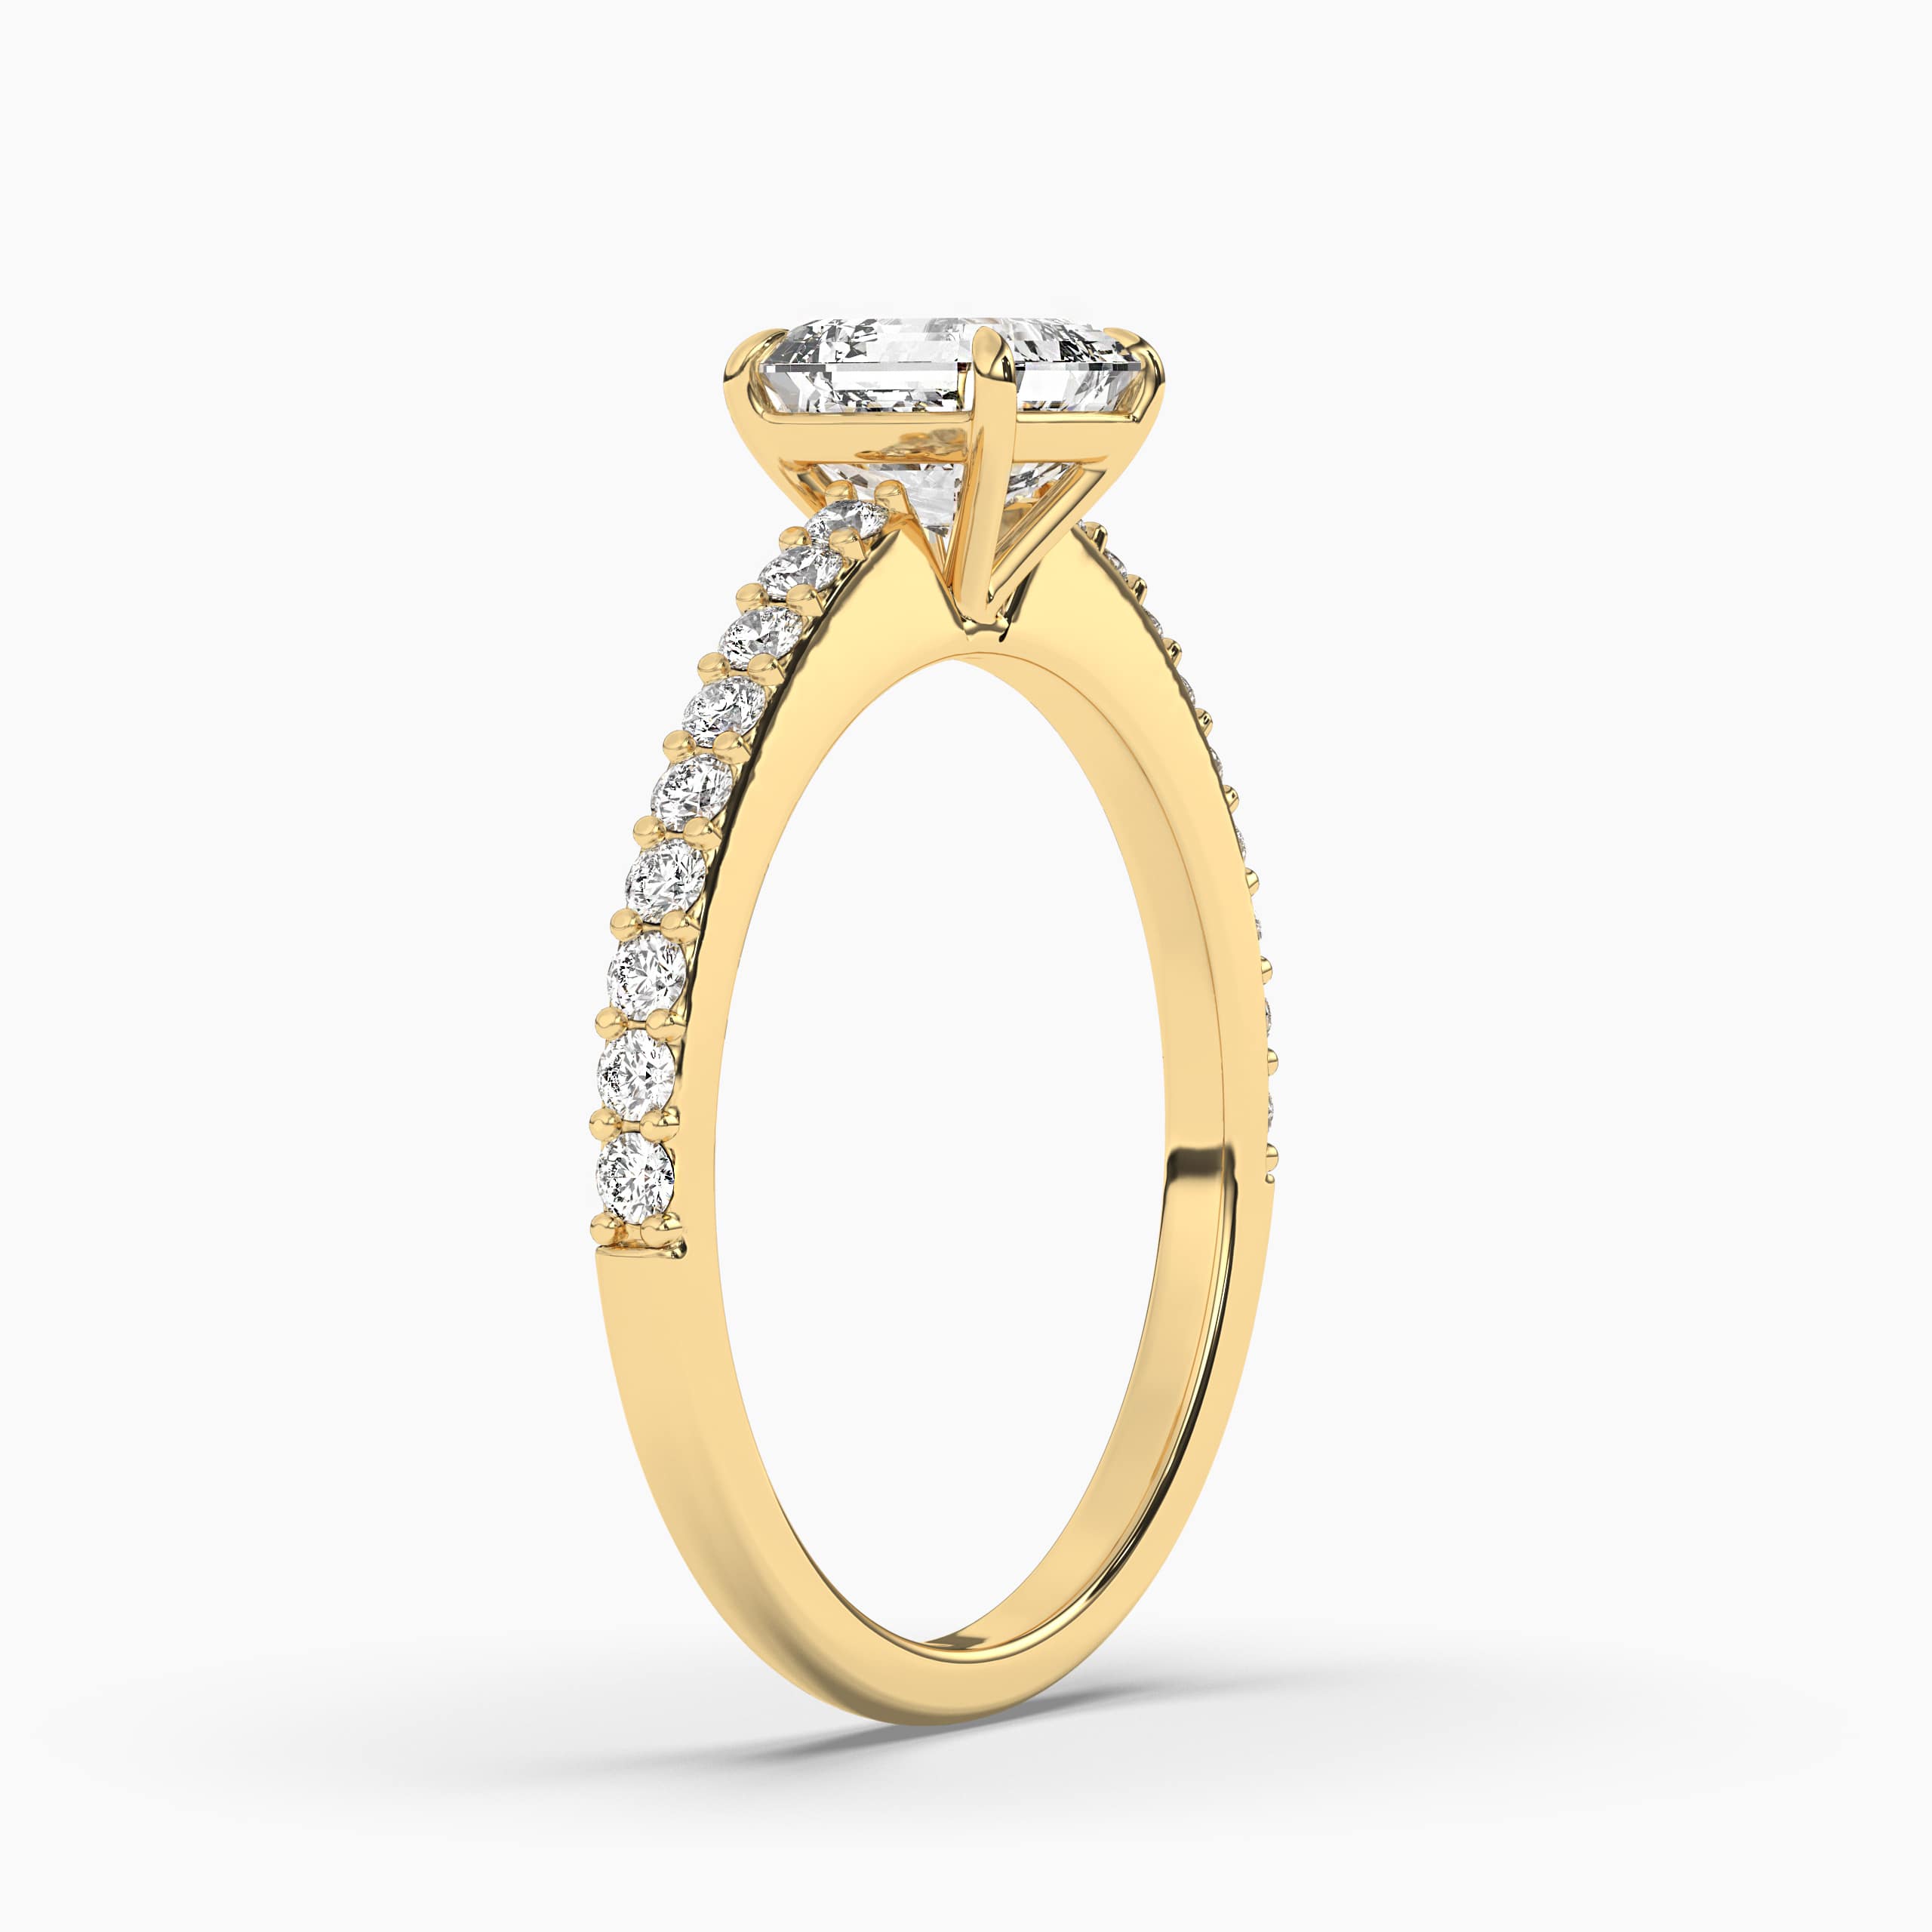 14k Yellow Gold Asscher Cut Diamond Engagement Ring with Round Pave Diamonds